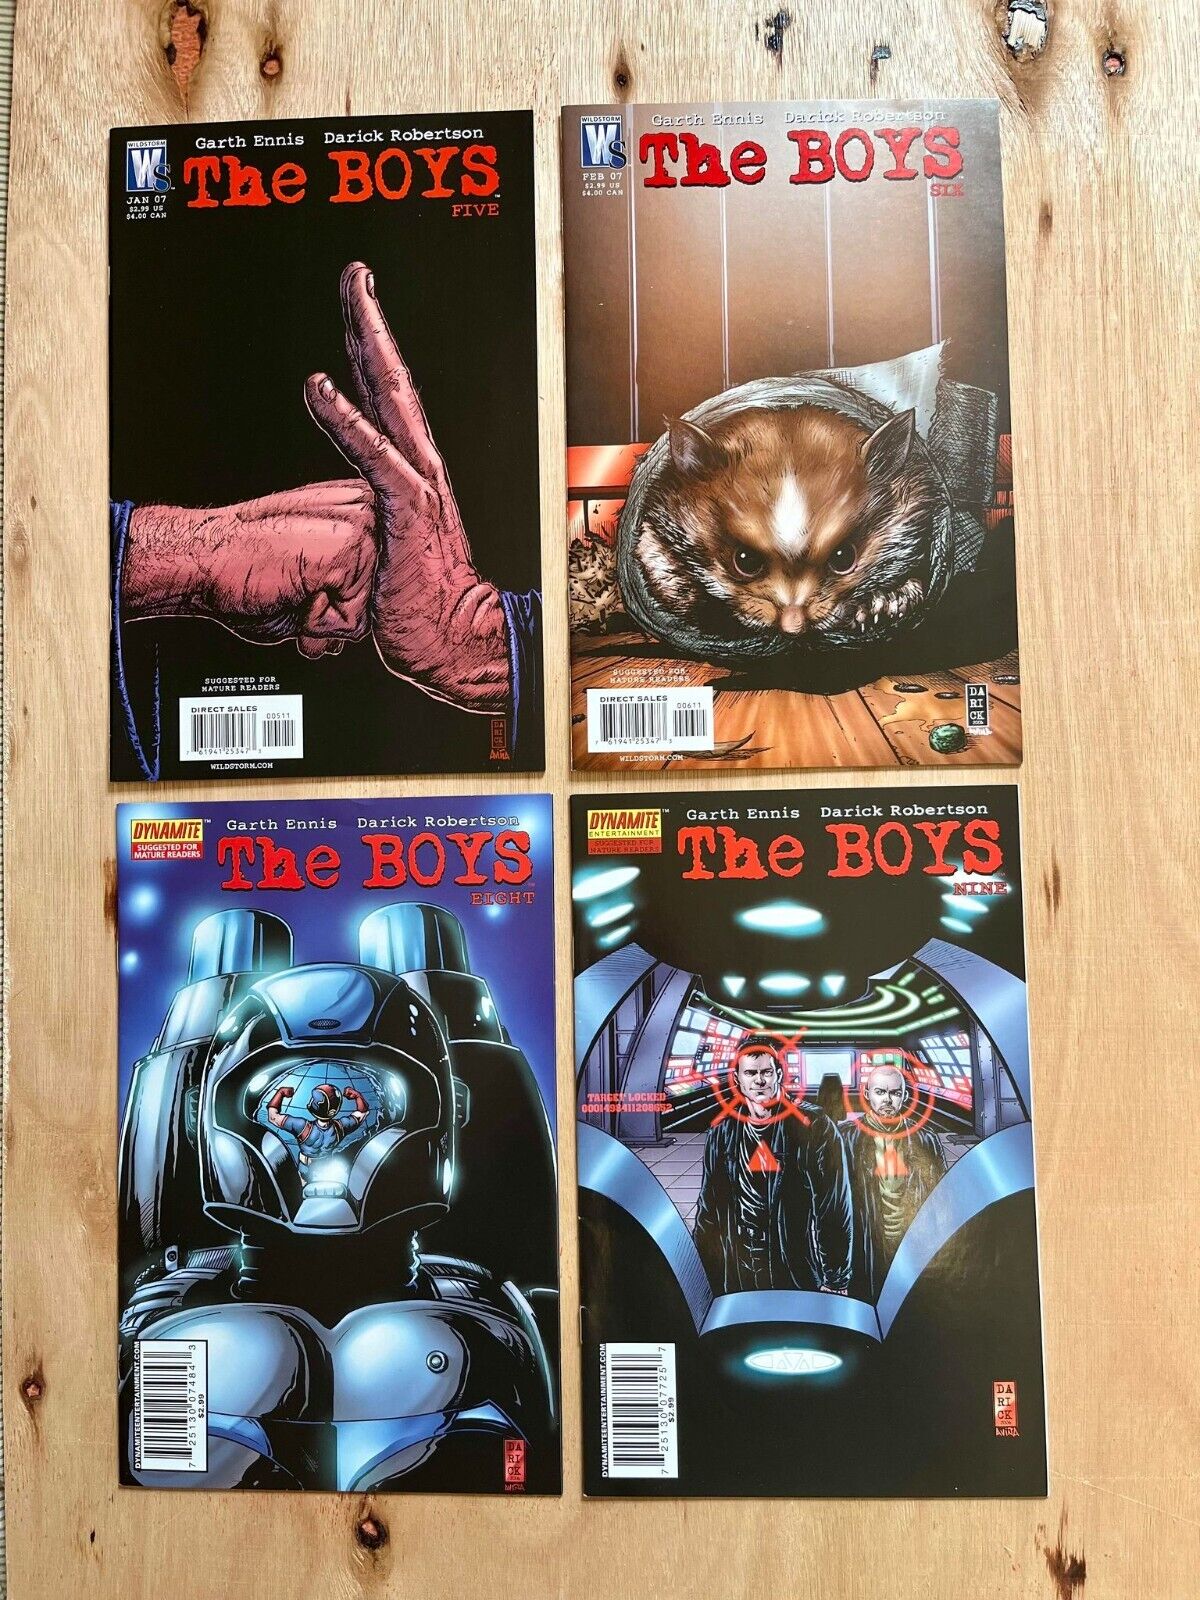 The Boys #5-6-8-9 - Dynamite and Wildstorm - 2006 NM